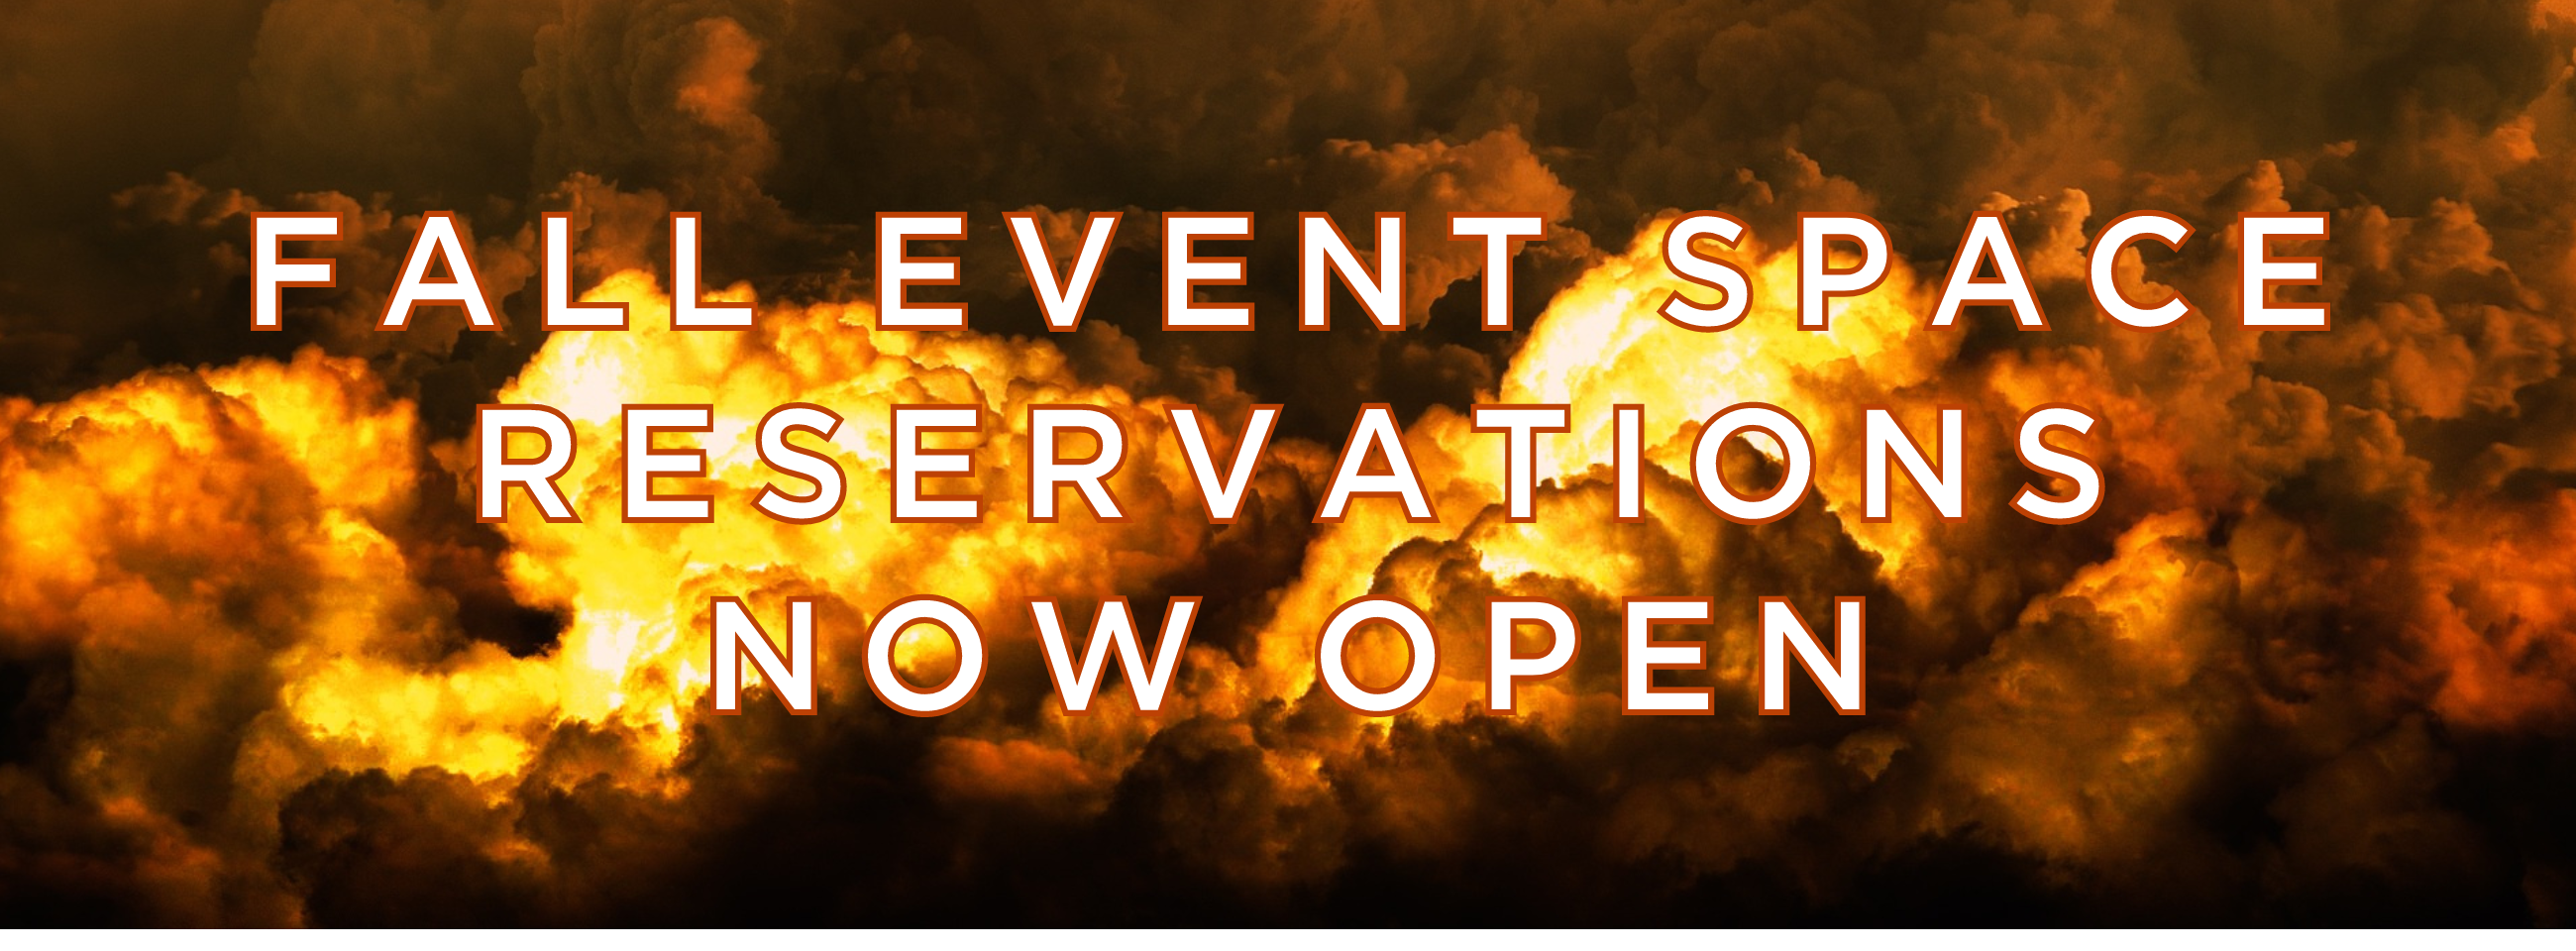 Event Space Reservations